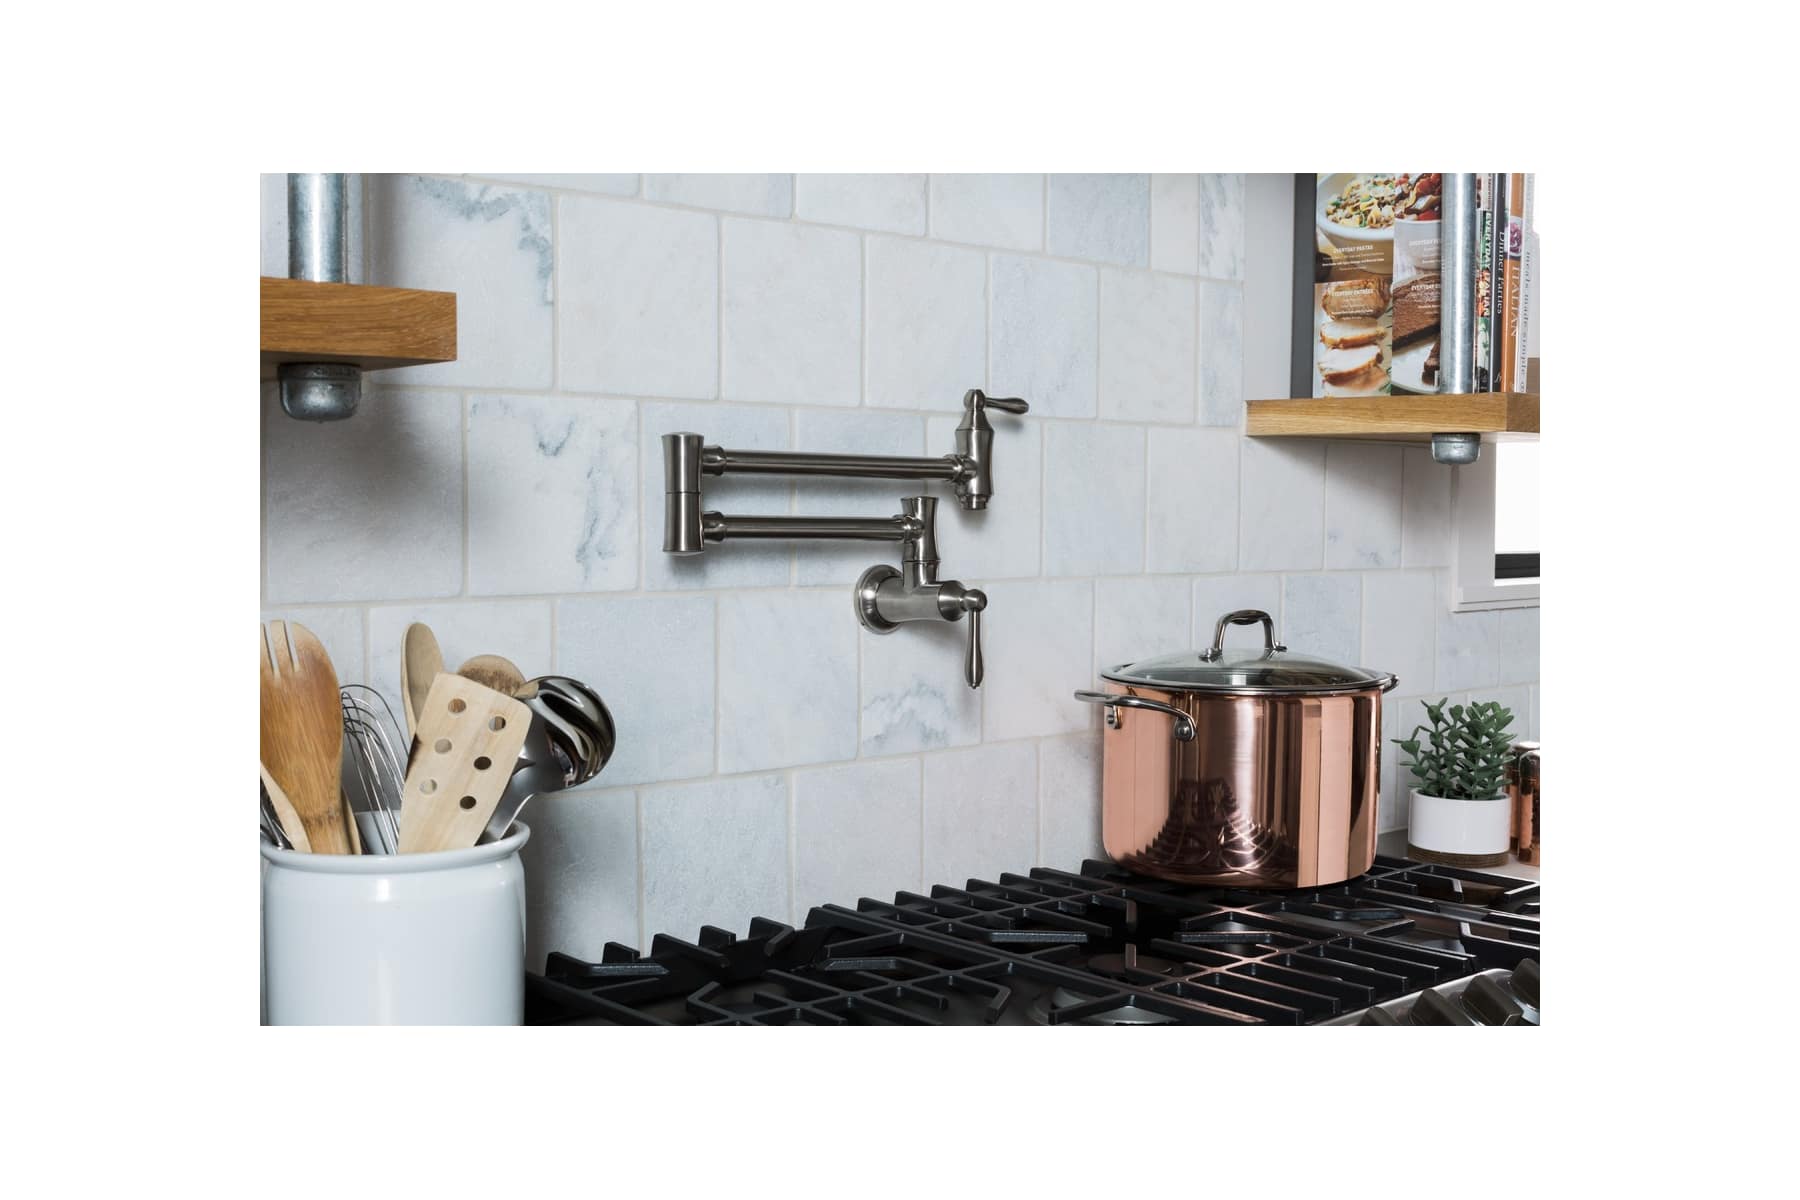 Traditional Wall Mount Pot Filler in Champagne Bronze 1177LF-CZ